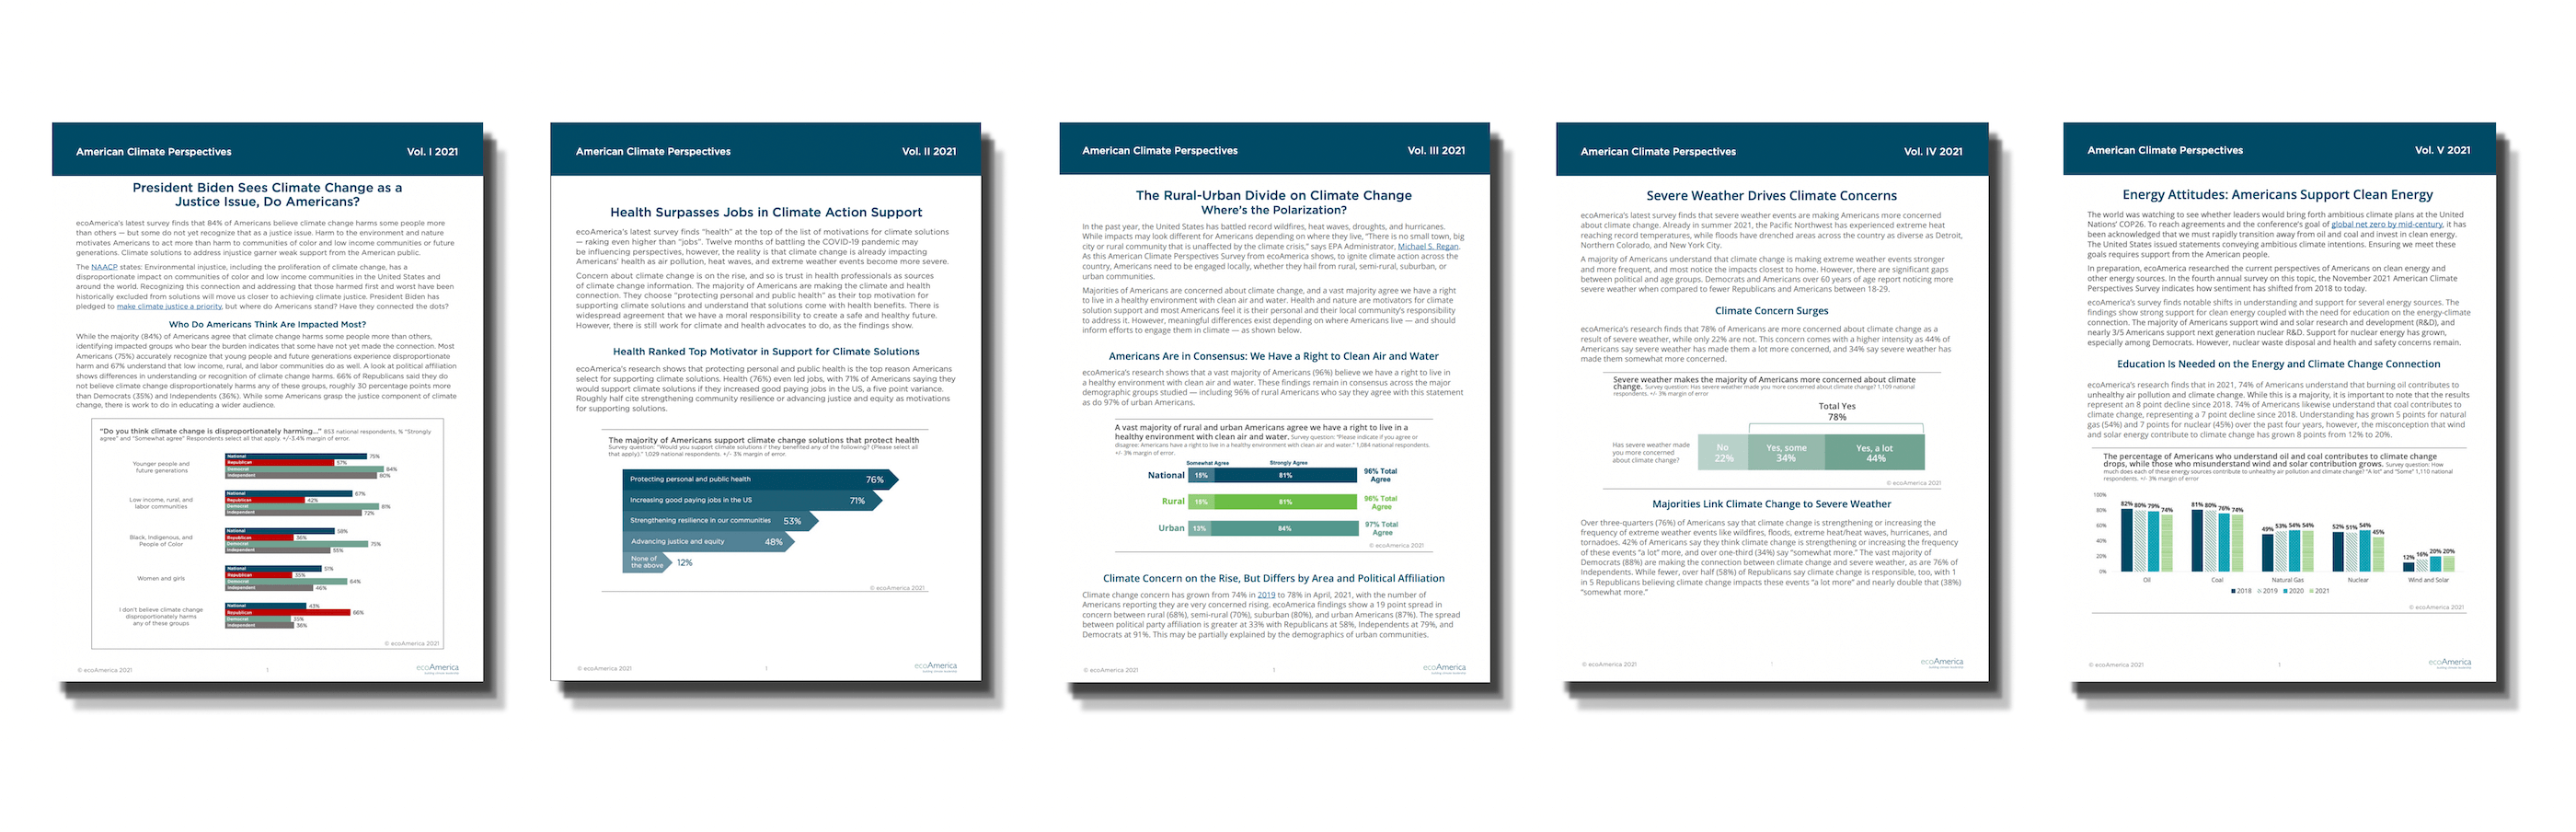 The five report covers for the American Climate Perspectives Surveys side by side with drop shadows beside each one.